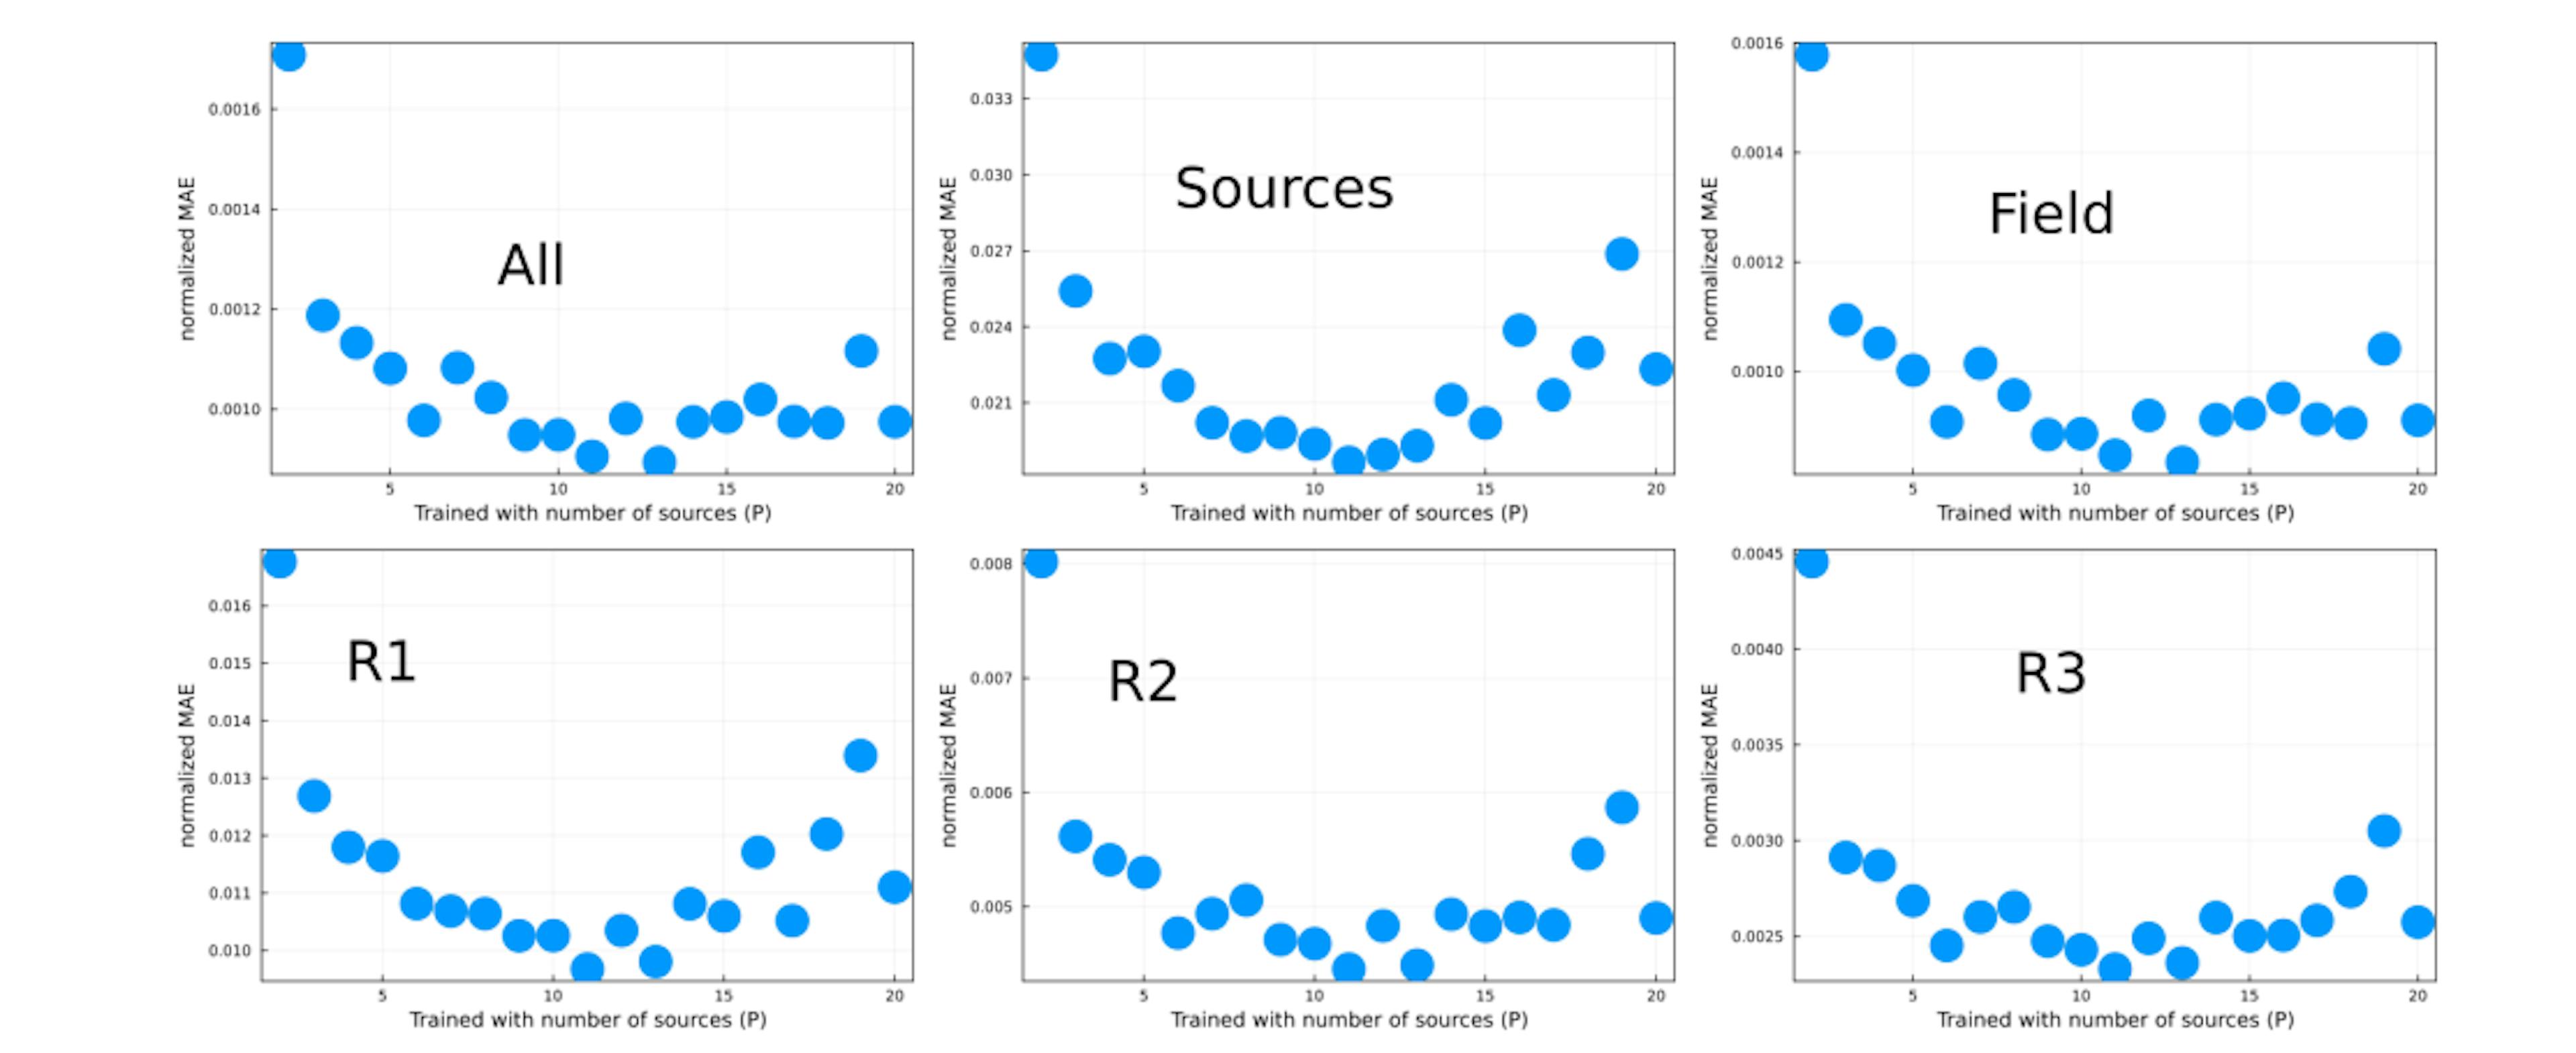 Figure 17: Mean average error for a test set with containing samples with all number of sources for a network trainedwith a different fixed number of sources P. Each data point corresponds to a network trained with a fixed number of